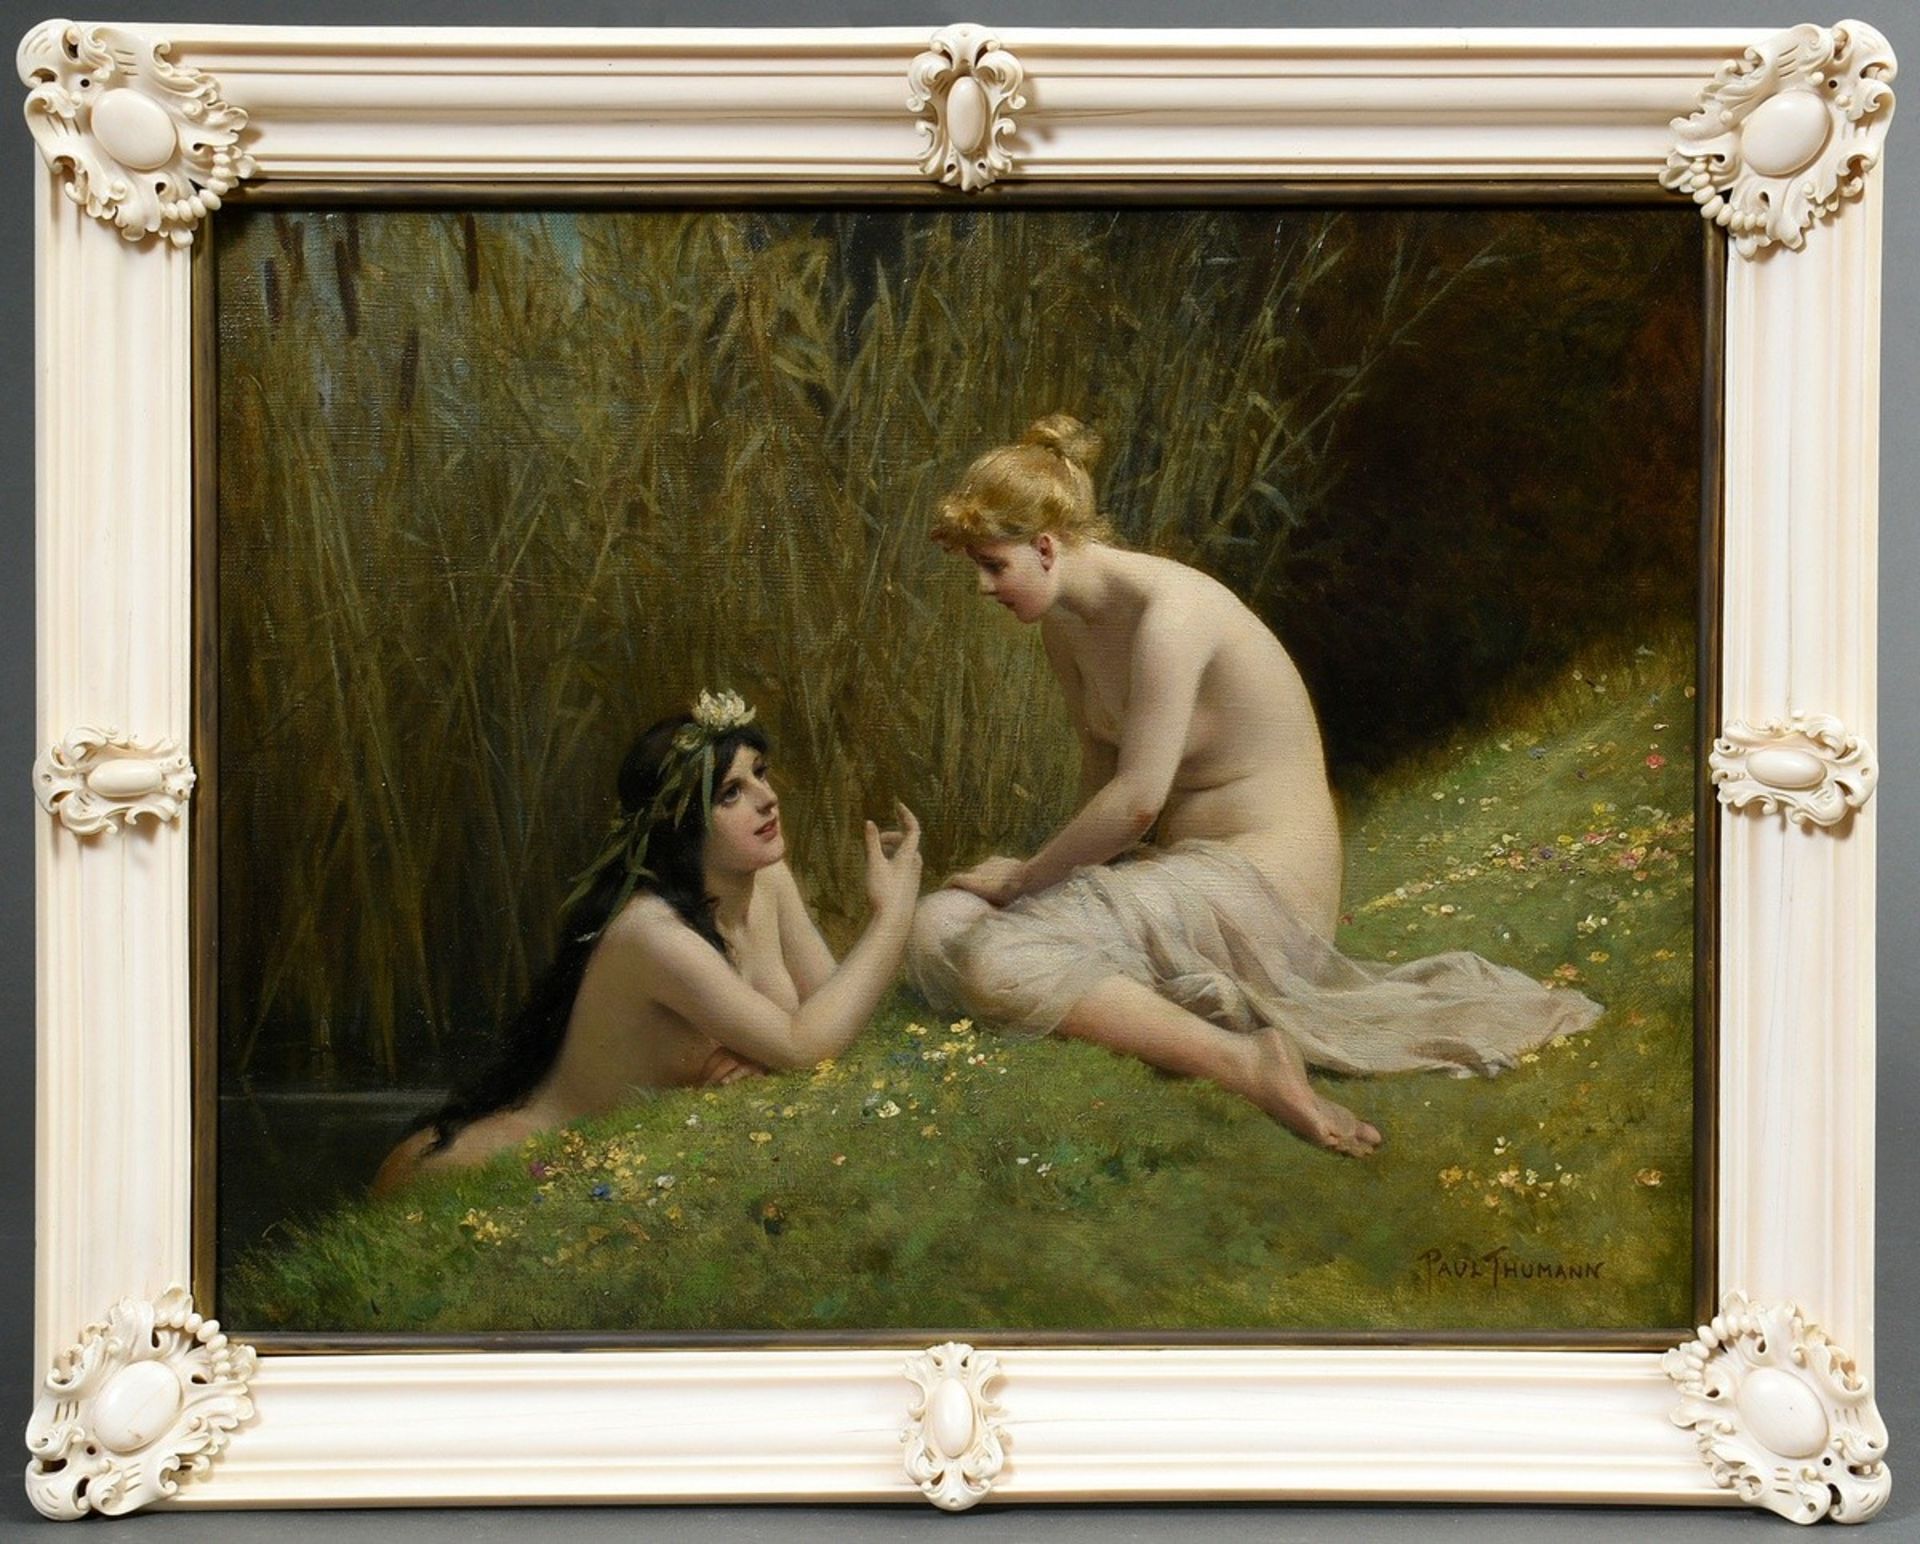 Thumann, Paul (1834-1908) "Water Nymph and Elf in Conversation" c. 1870, oil/canvas, l.r. sign., in